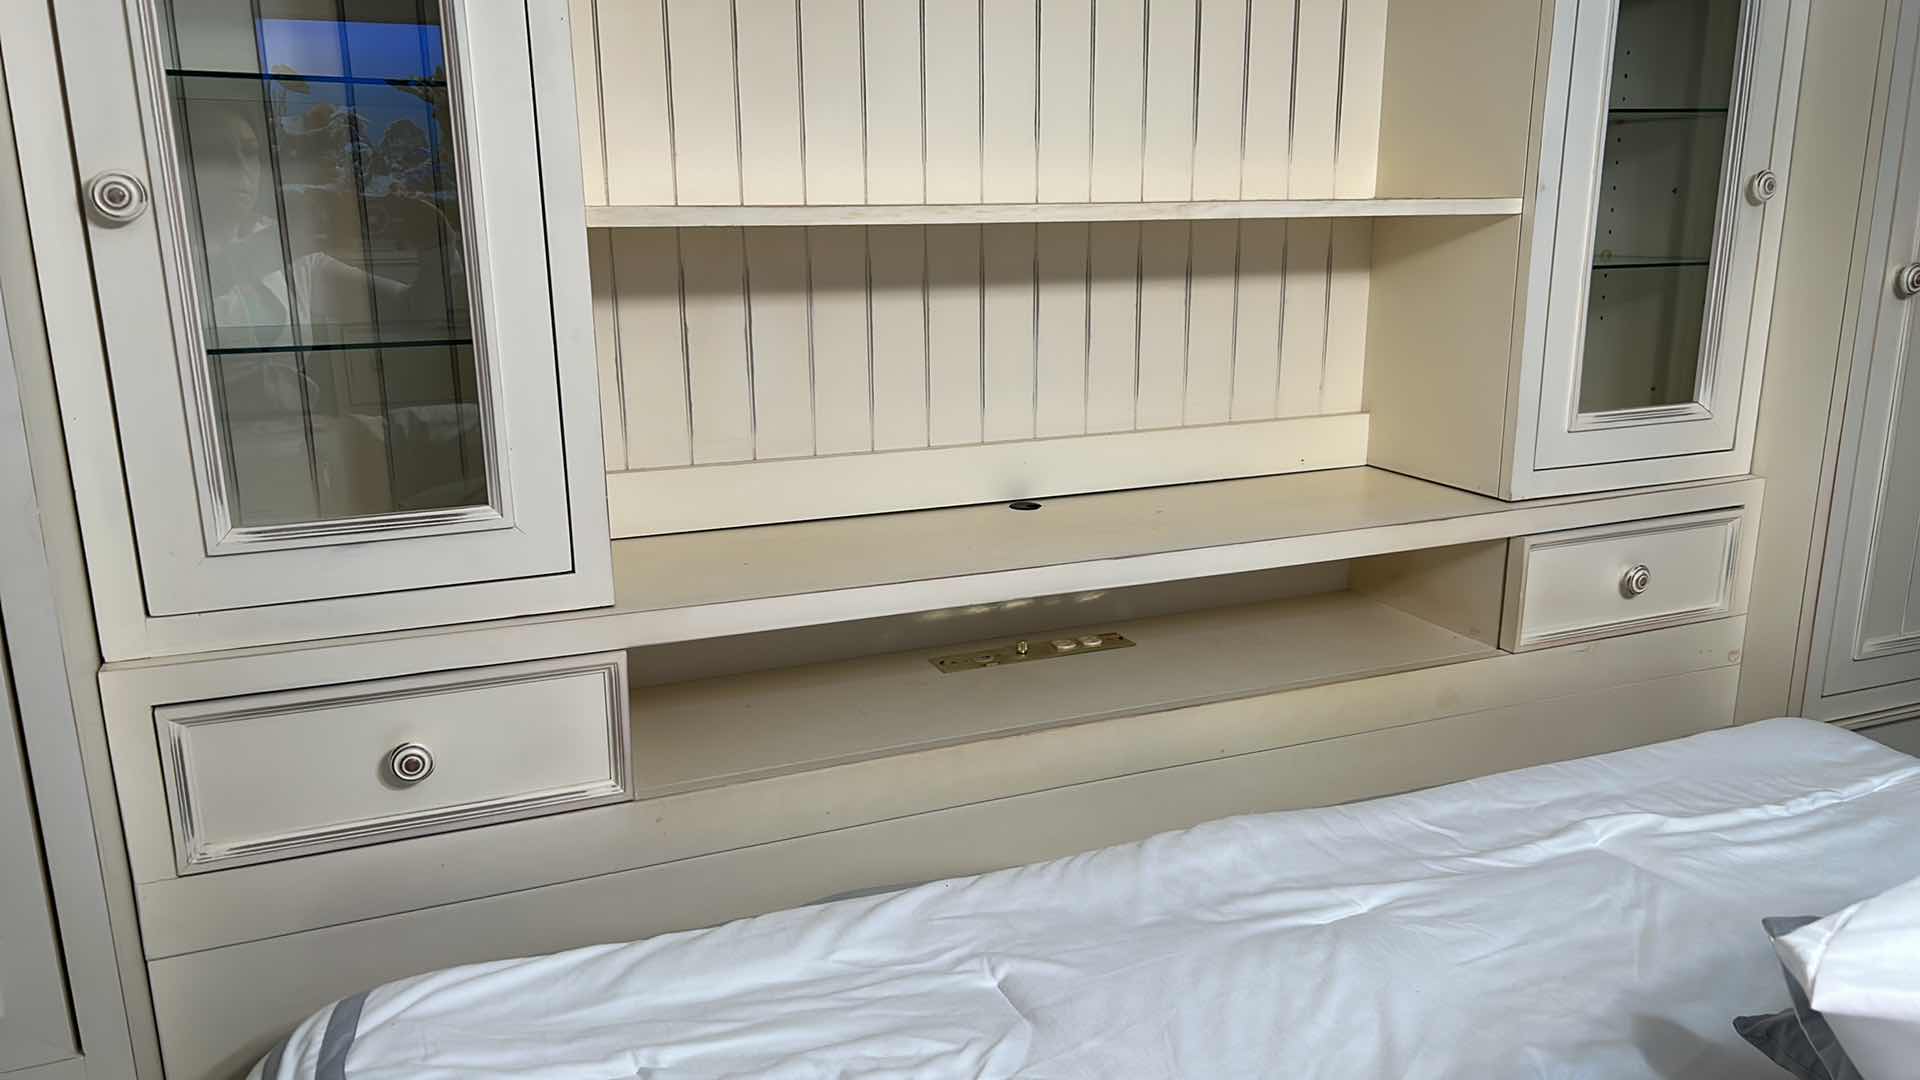 Photo 13 of ASHLEY FURNITURE CREAM FARMHOUSE STYLE BEDROOM SET (EXCLUDES MATTRESS AND BEDDING) $6000 10’6.5” x 19” x H6’8”